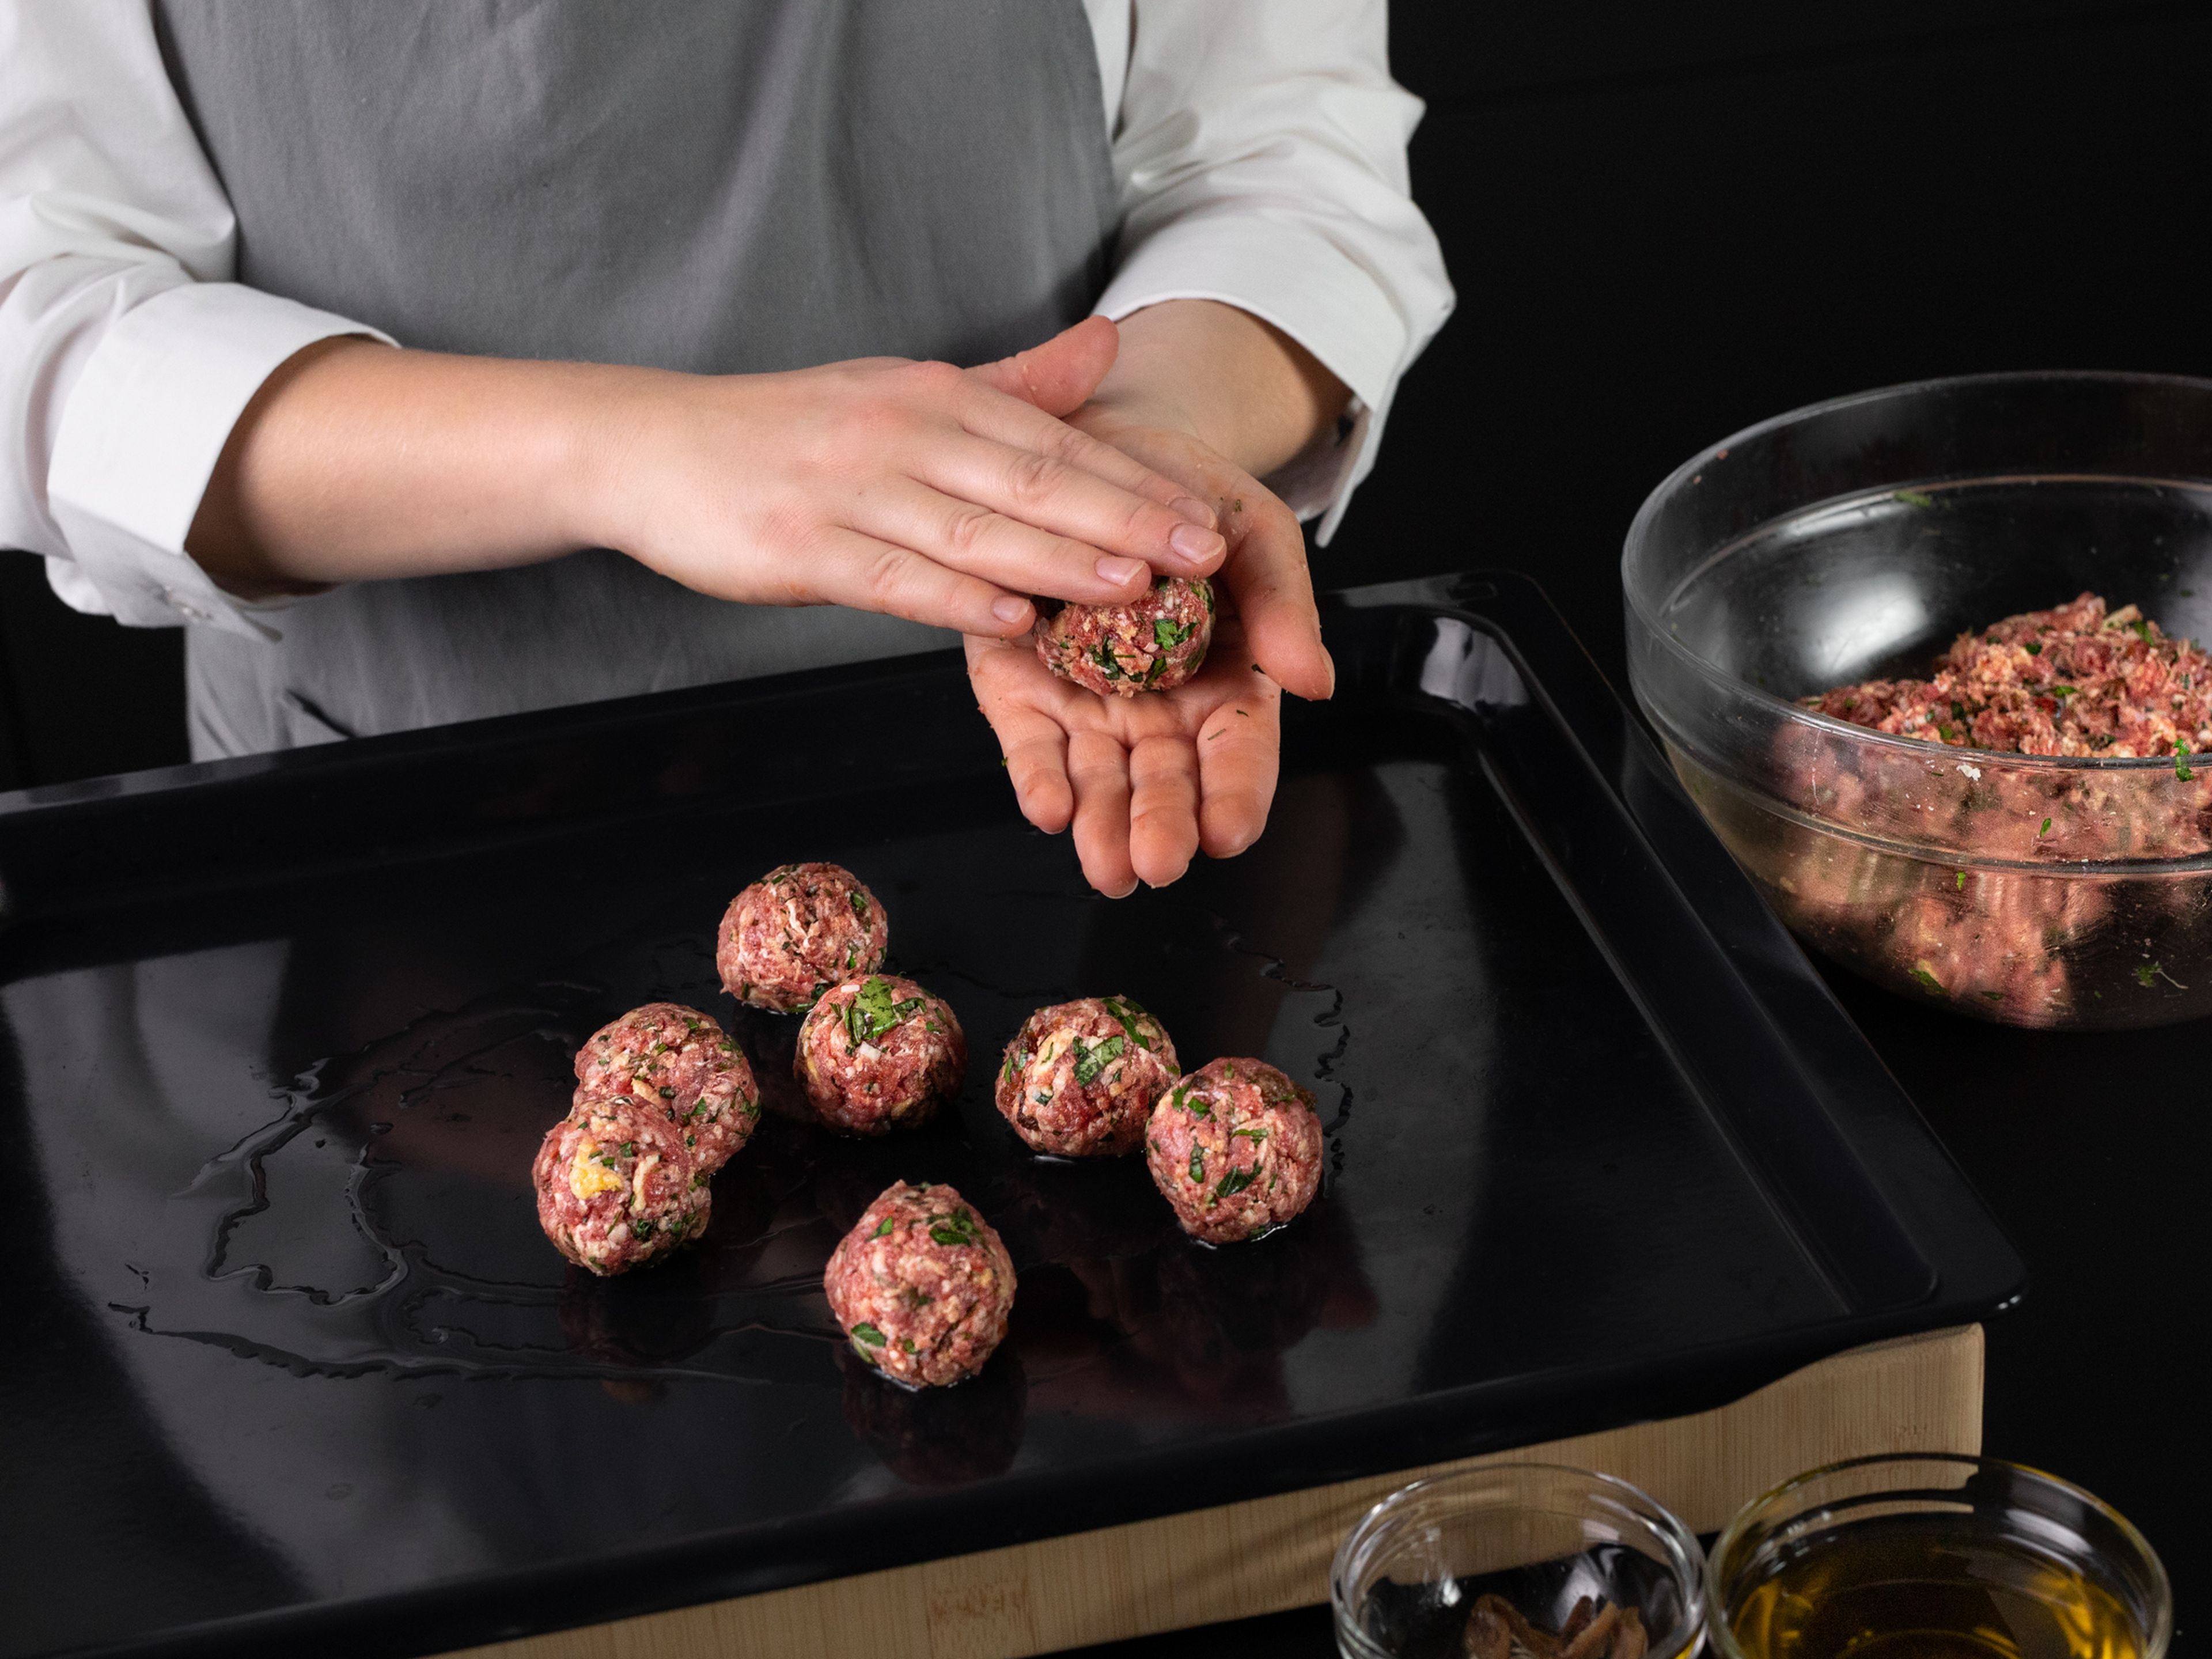 Add vegetable oil to a baking sheet, then use your palms to roll the meatball mixture into even balls about the size of a golf ball, placing them directly on the baking sheet when formed. Gently roll the meatballs to coat in oil, then transfer to oven and bake at 220°C/425°F for approx. 10 min.